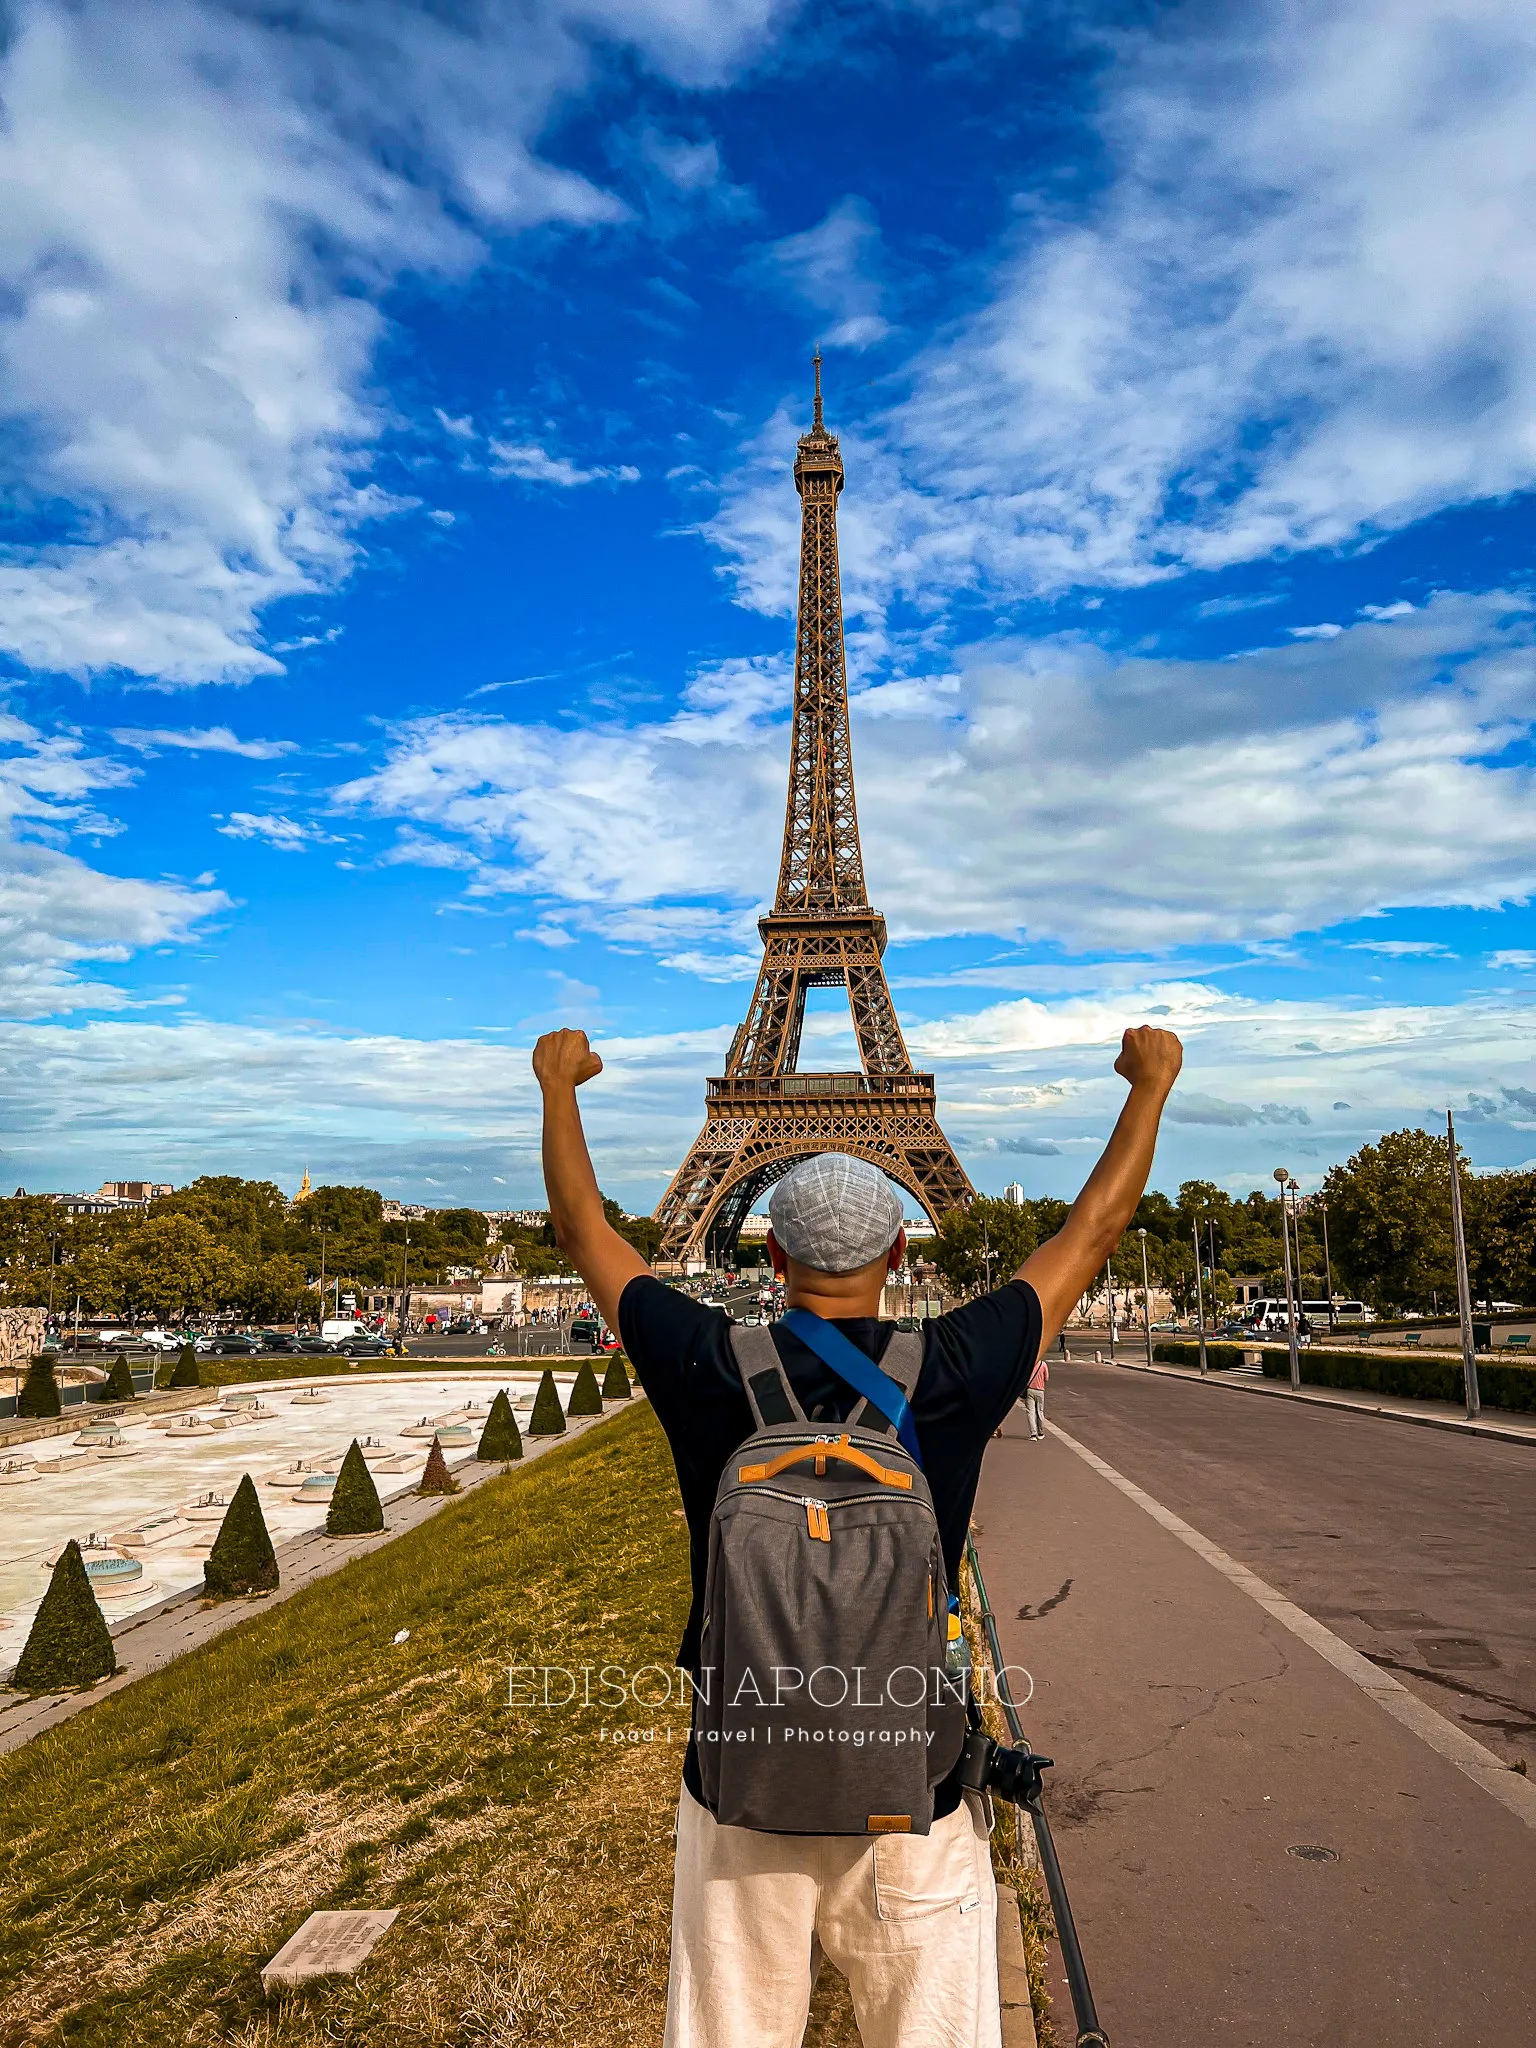 man wearing a black shirt and a pair of white or cream pants plus a grey cap on, carrying a grey backpack strapped to his back, standing with both hands closed fist, both arms are held up to the sky on a Victory pose, facing The Eiffel Tower in the distance.